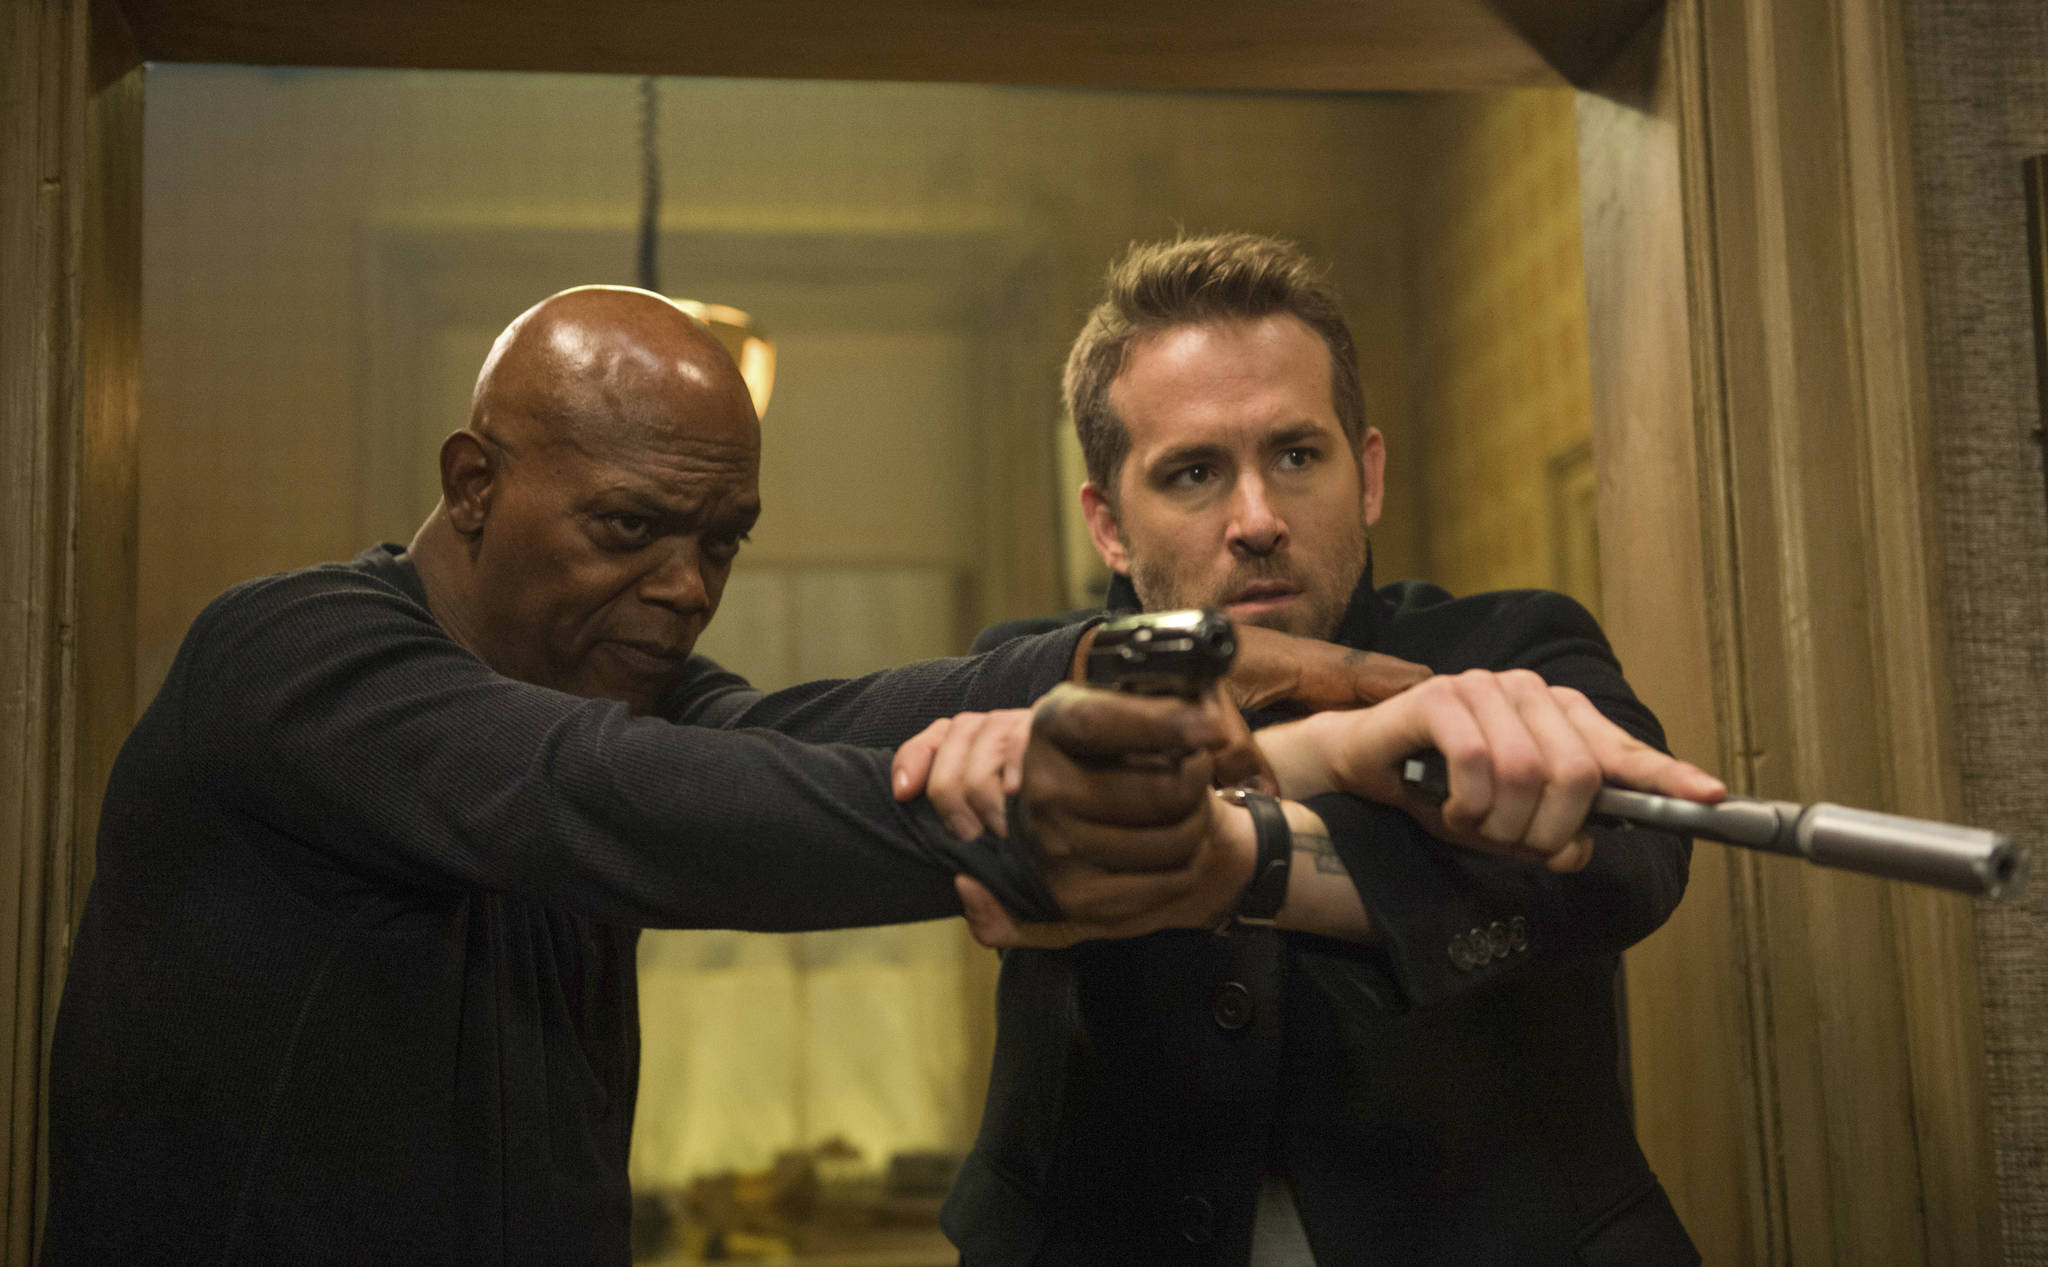 This image released by Lionsgate shows Samuel L. Jackson, left, and Ryan Reynolds in “The Hitman’s Bodyguard.” (Jack English/Lionsgate via AP)